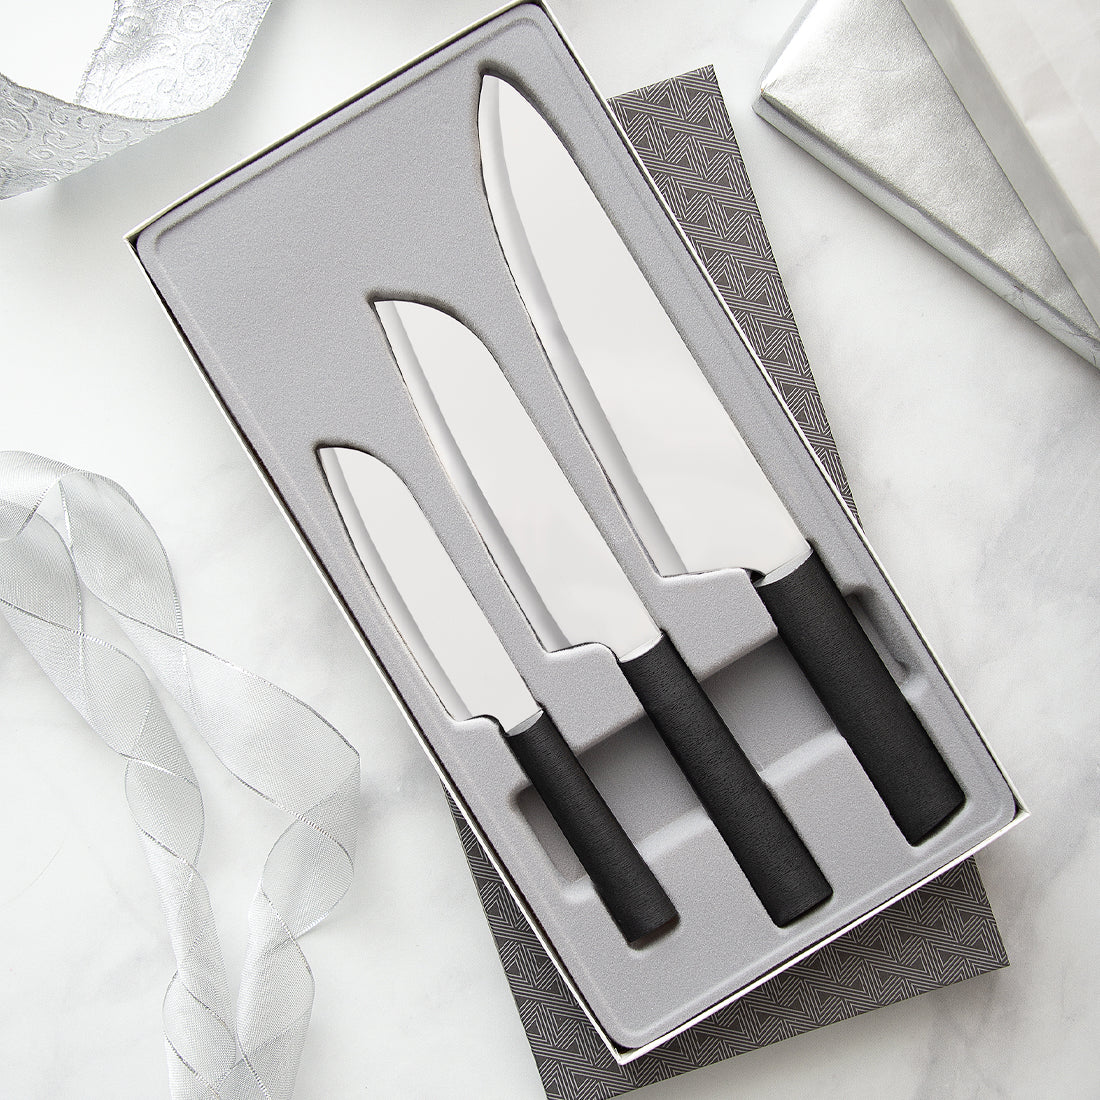  Rada Cutlery Cheese Knife – Stainless Steel Steel Serrated Edge  With Aluminum Handle, Made in the USA, 9-5/8: Cheese Knives: Home & Kitchen